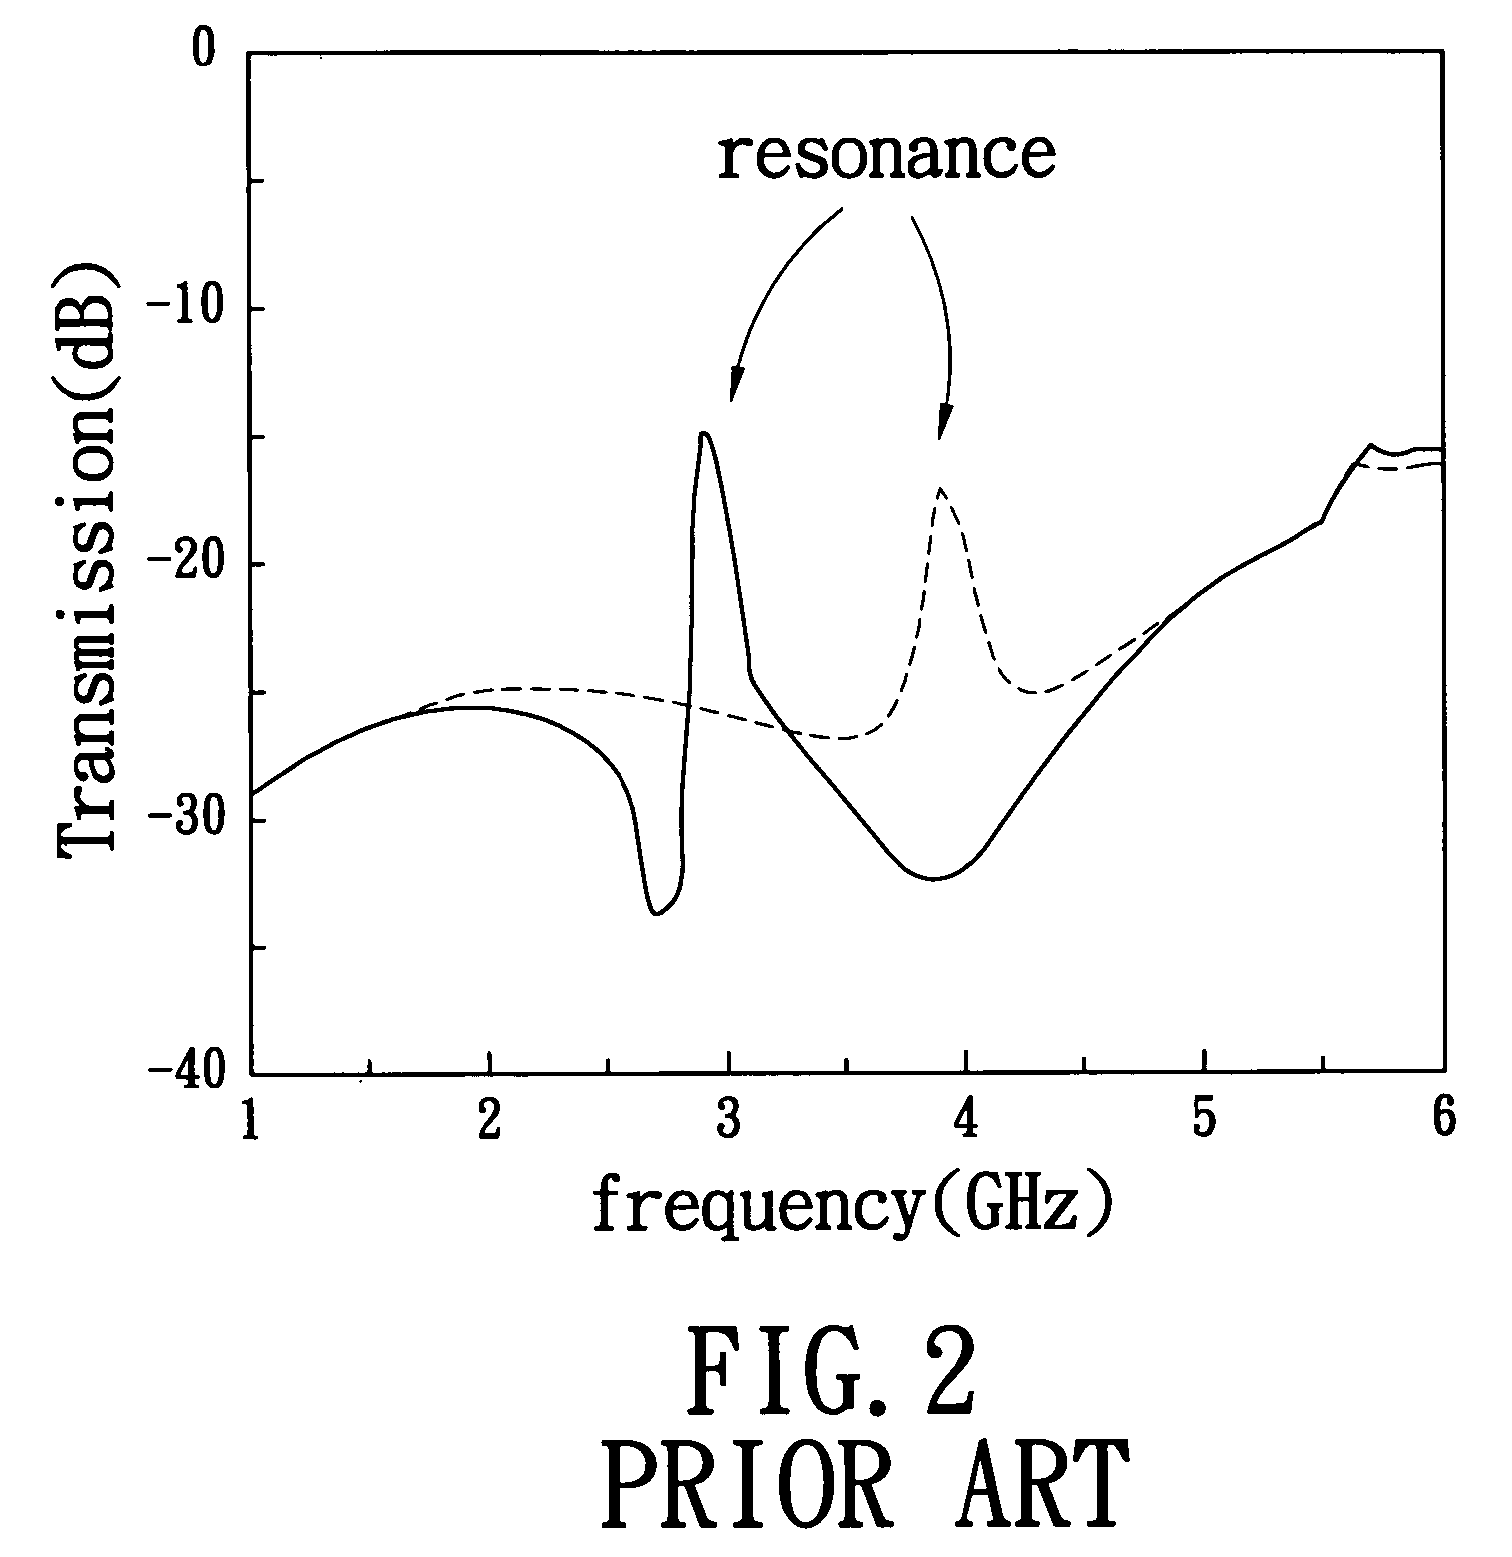 Structure of a circuit board for improving the performance of routing traces